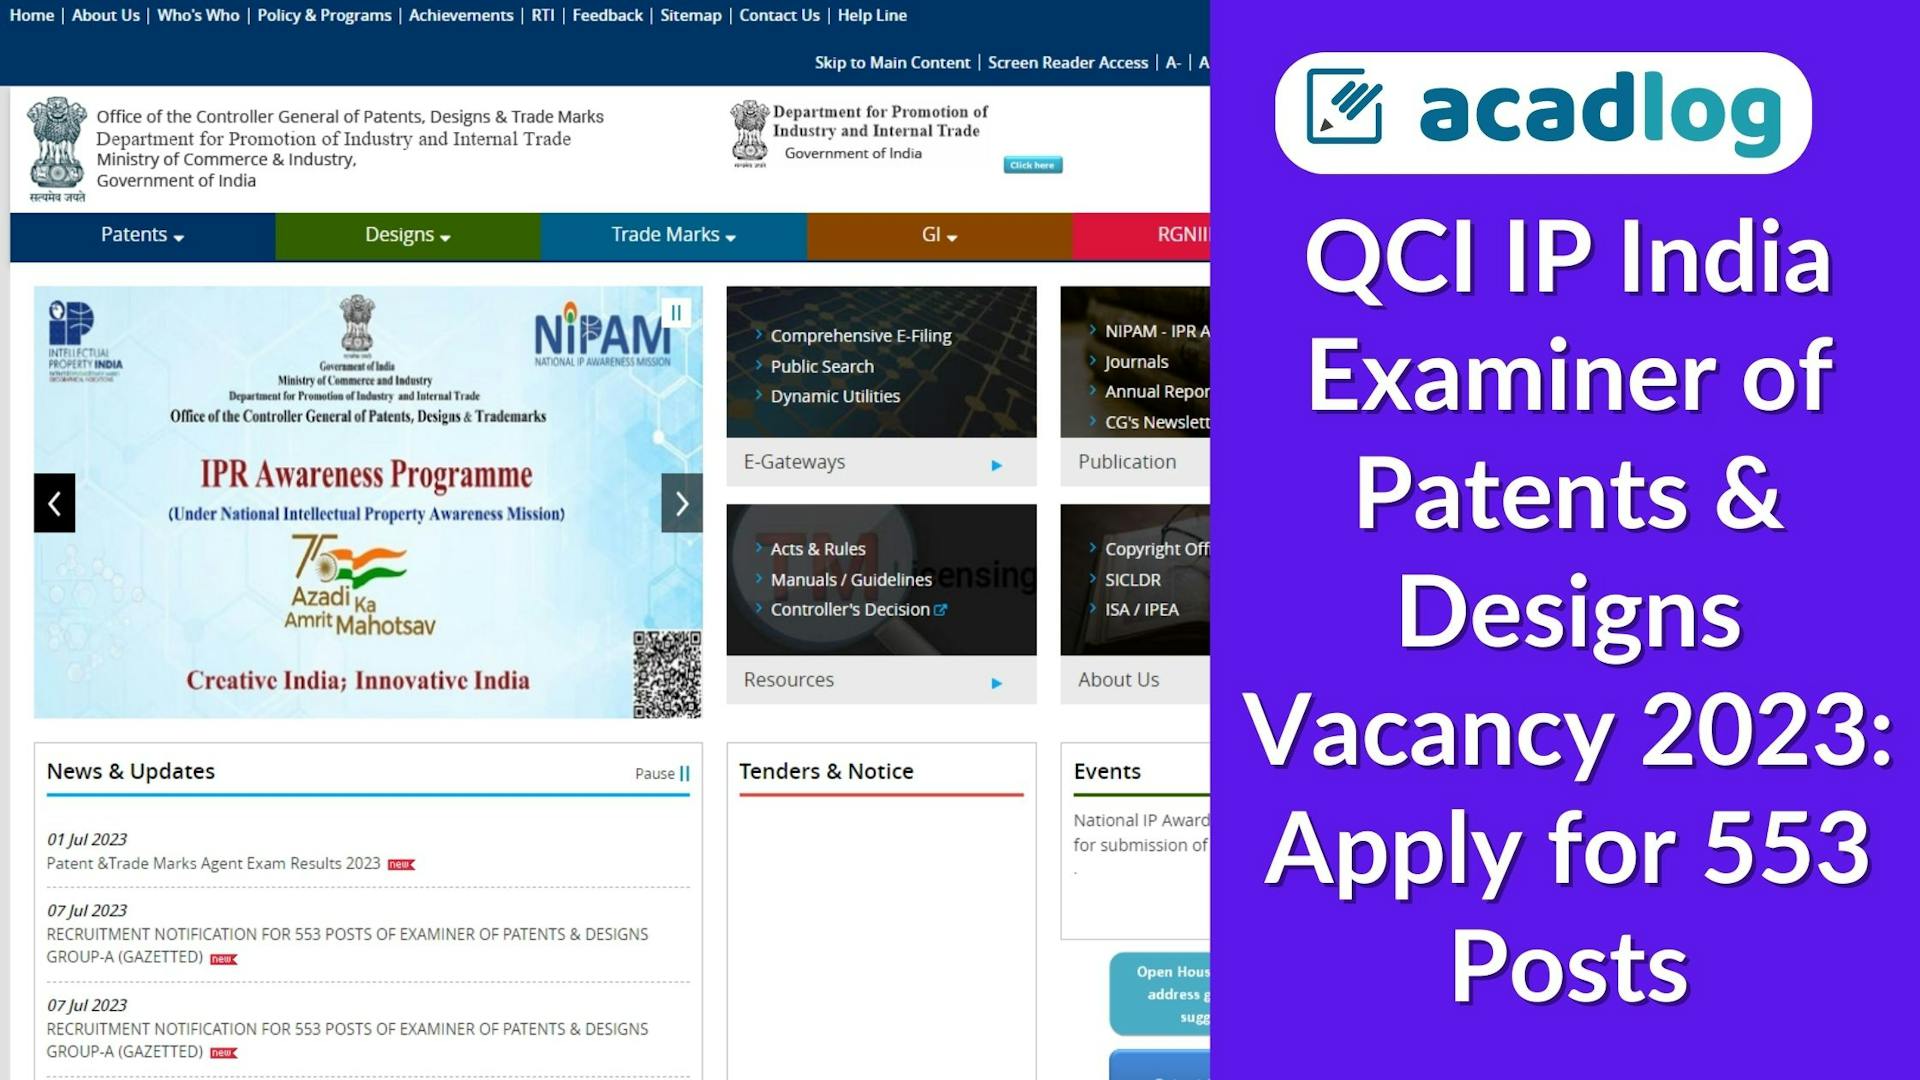 QCI IP India Examiner of Patents & Designs Vacancy 2023: Apply for 553 Posts